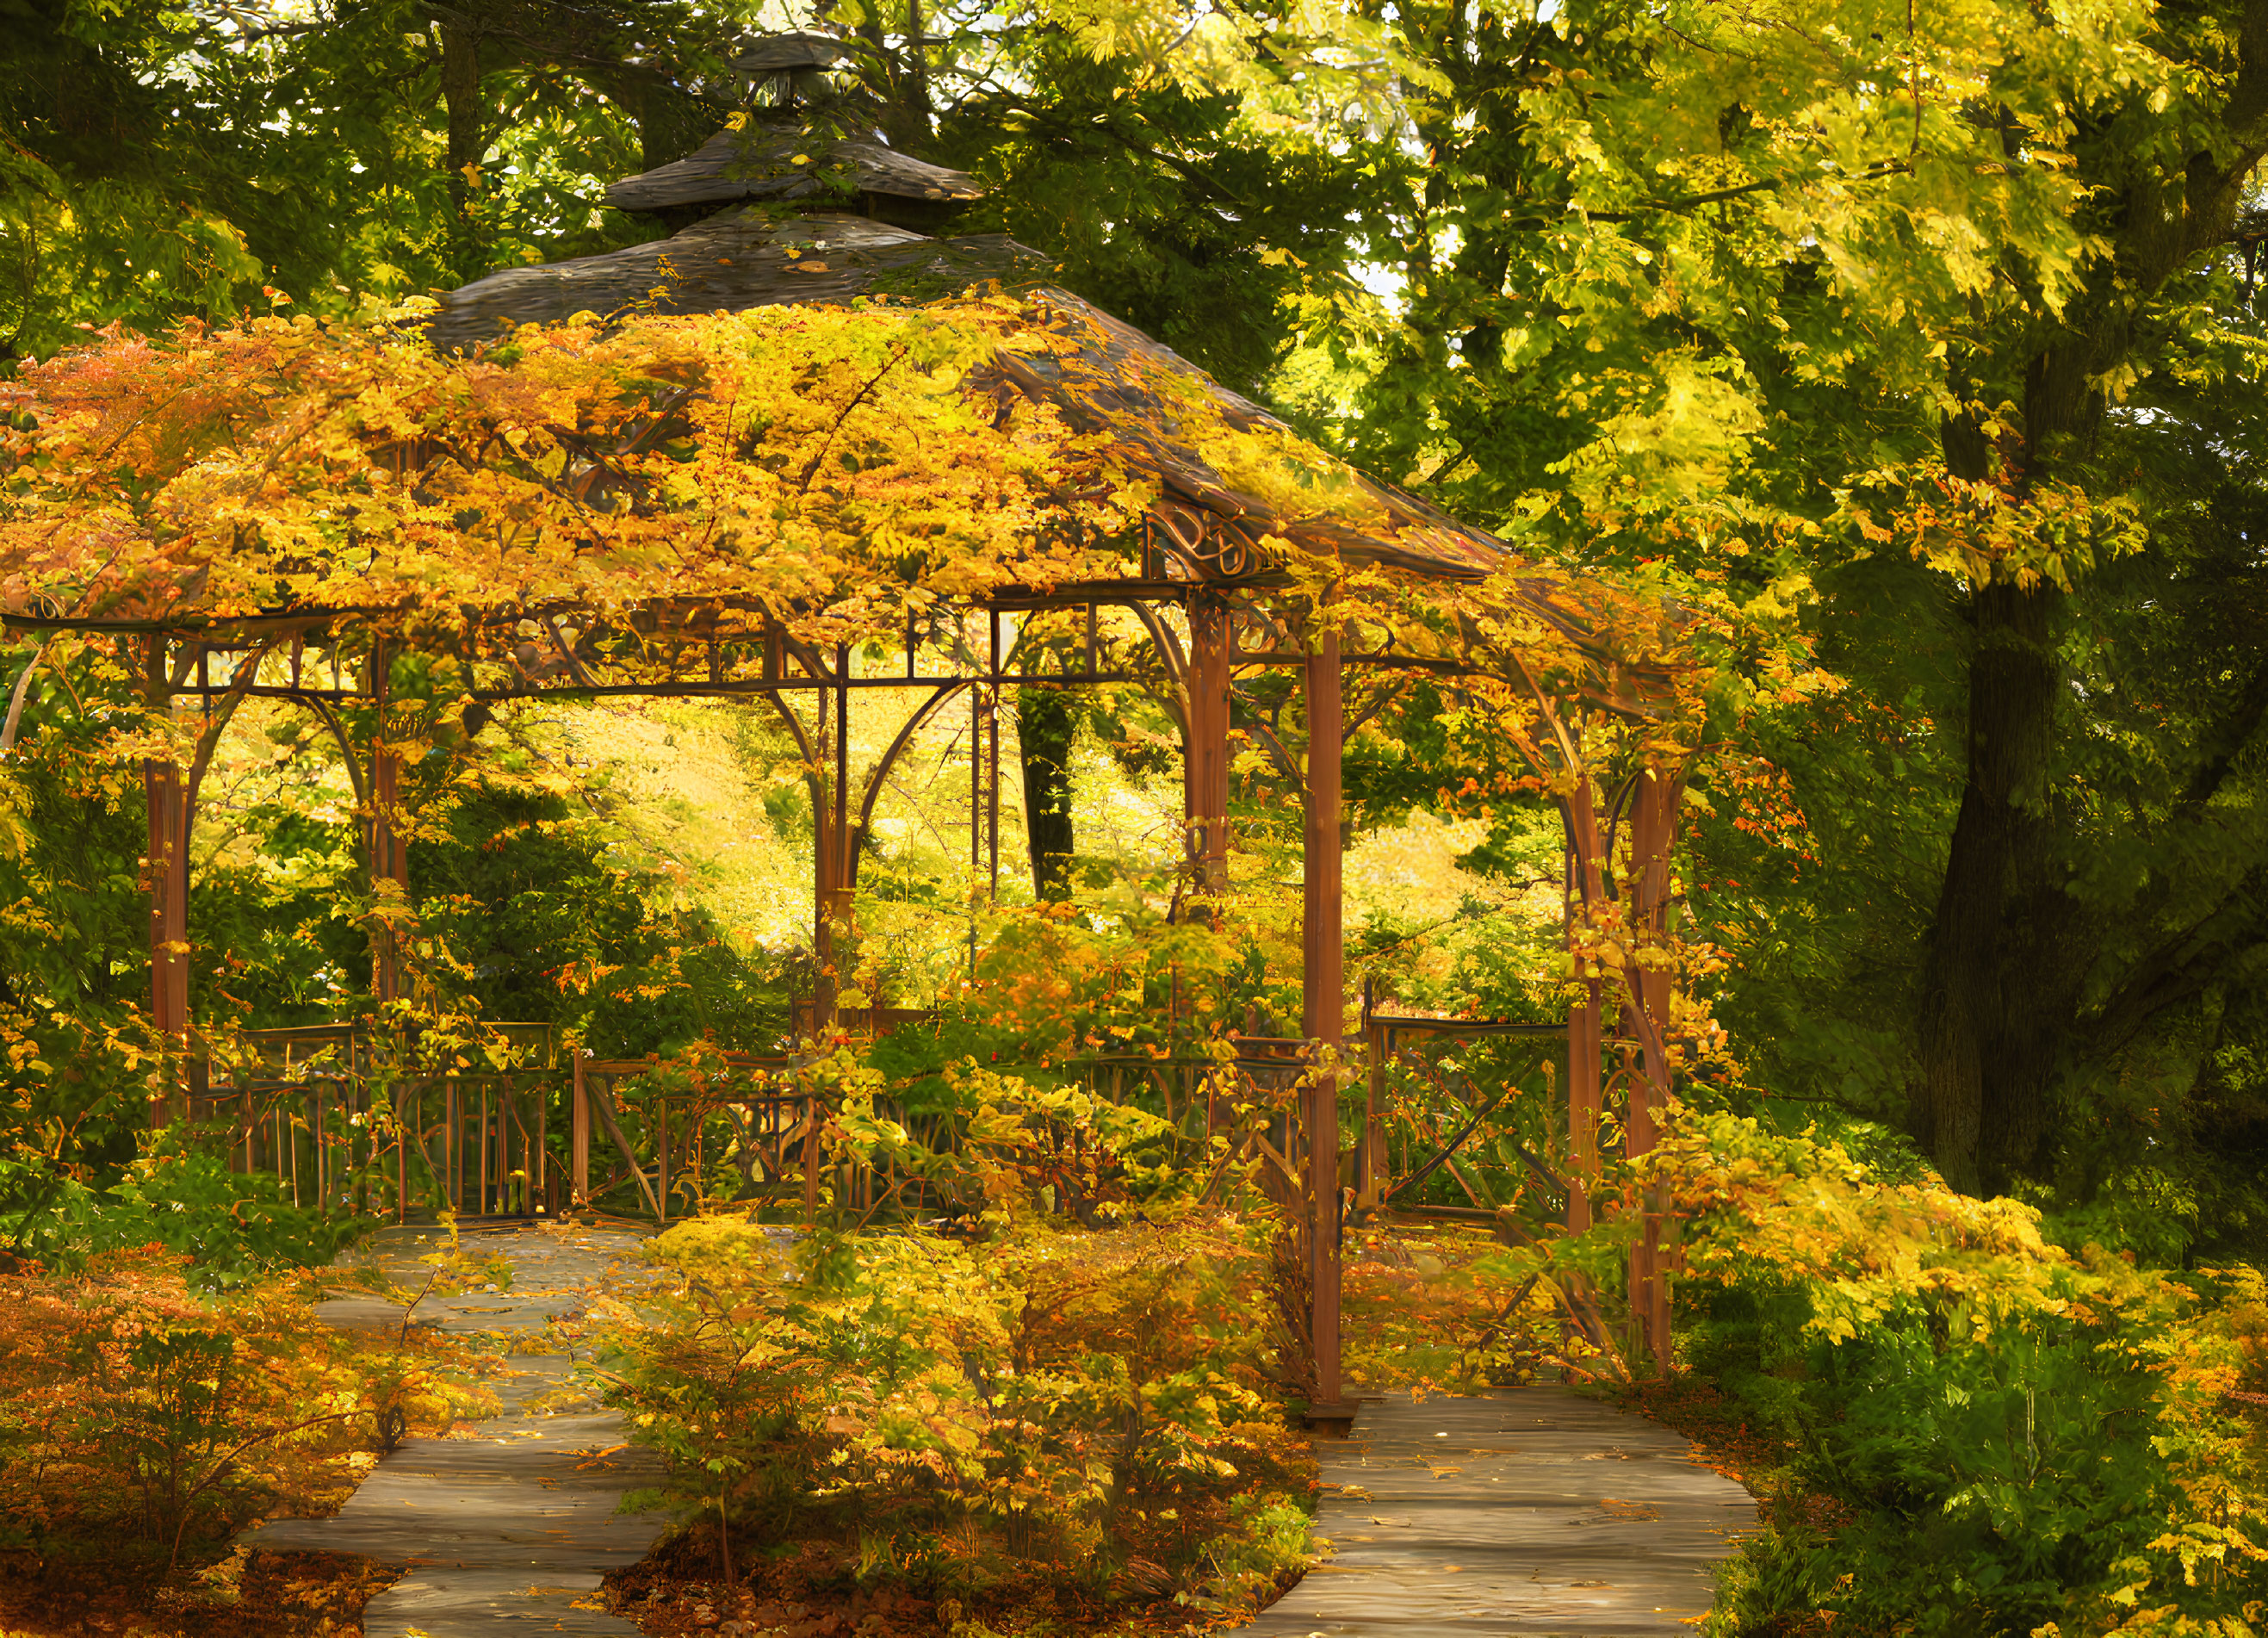 Wooden Gazebo Surrounded by Autumn Foliage and Pathway